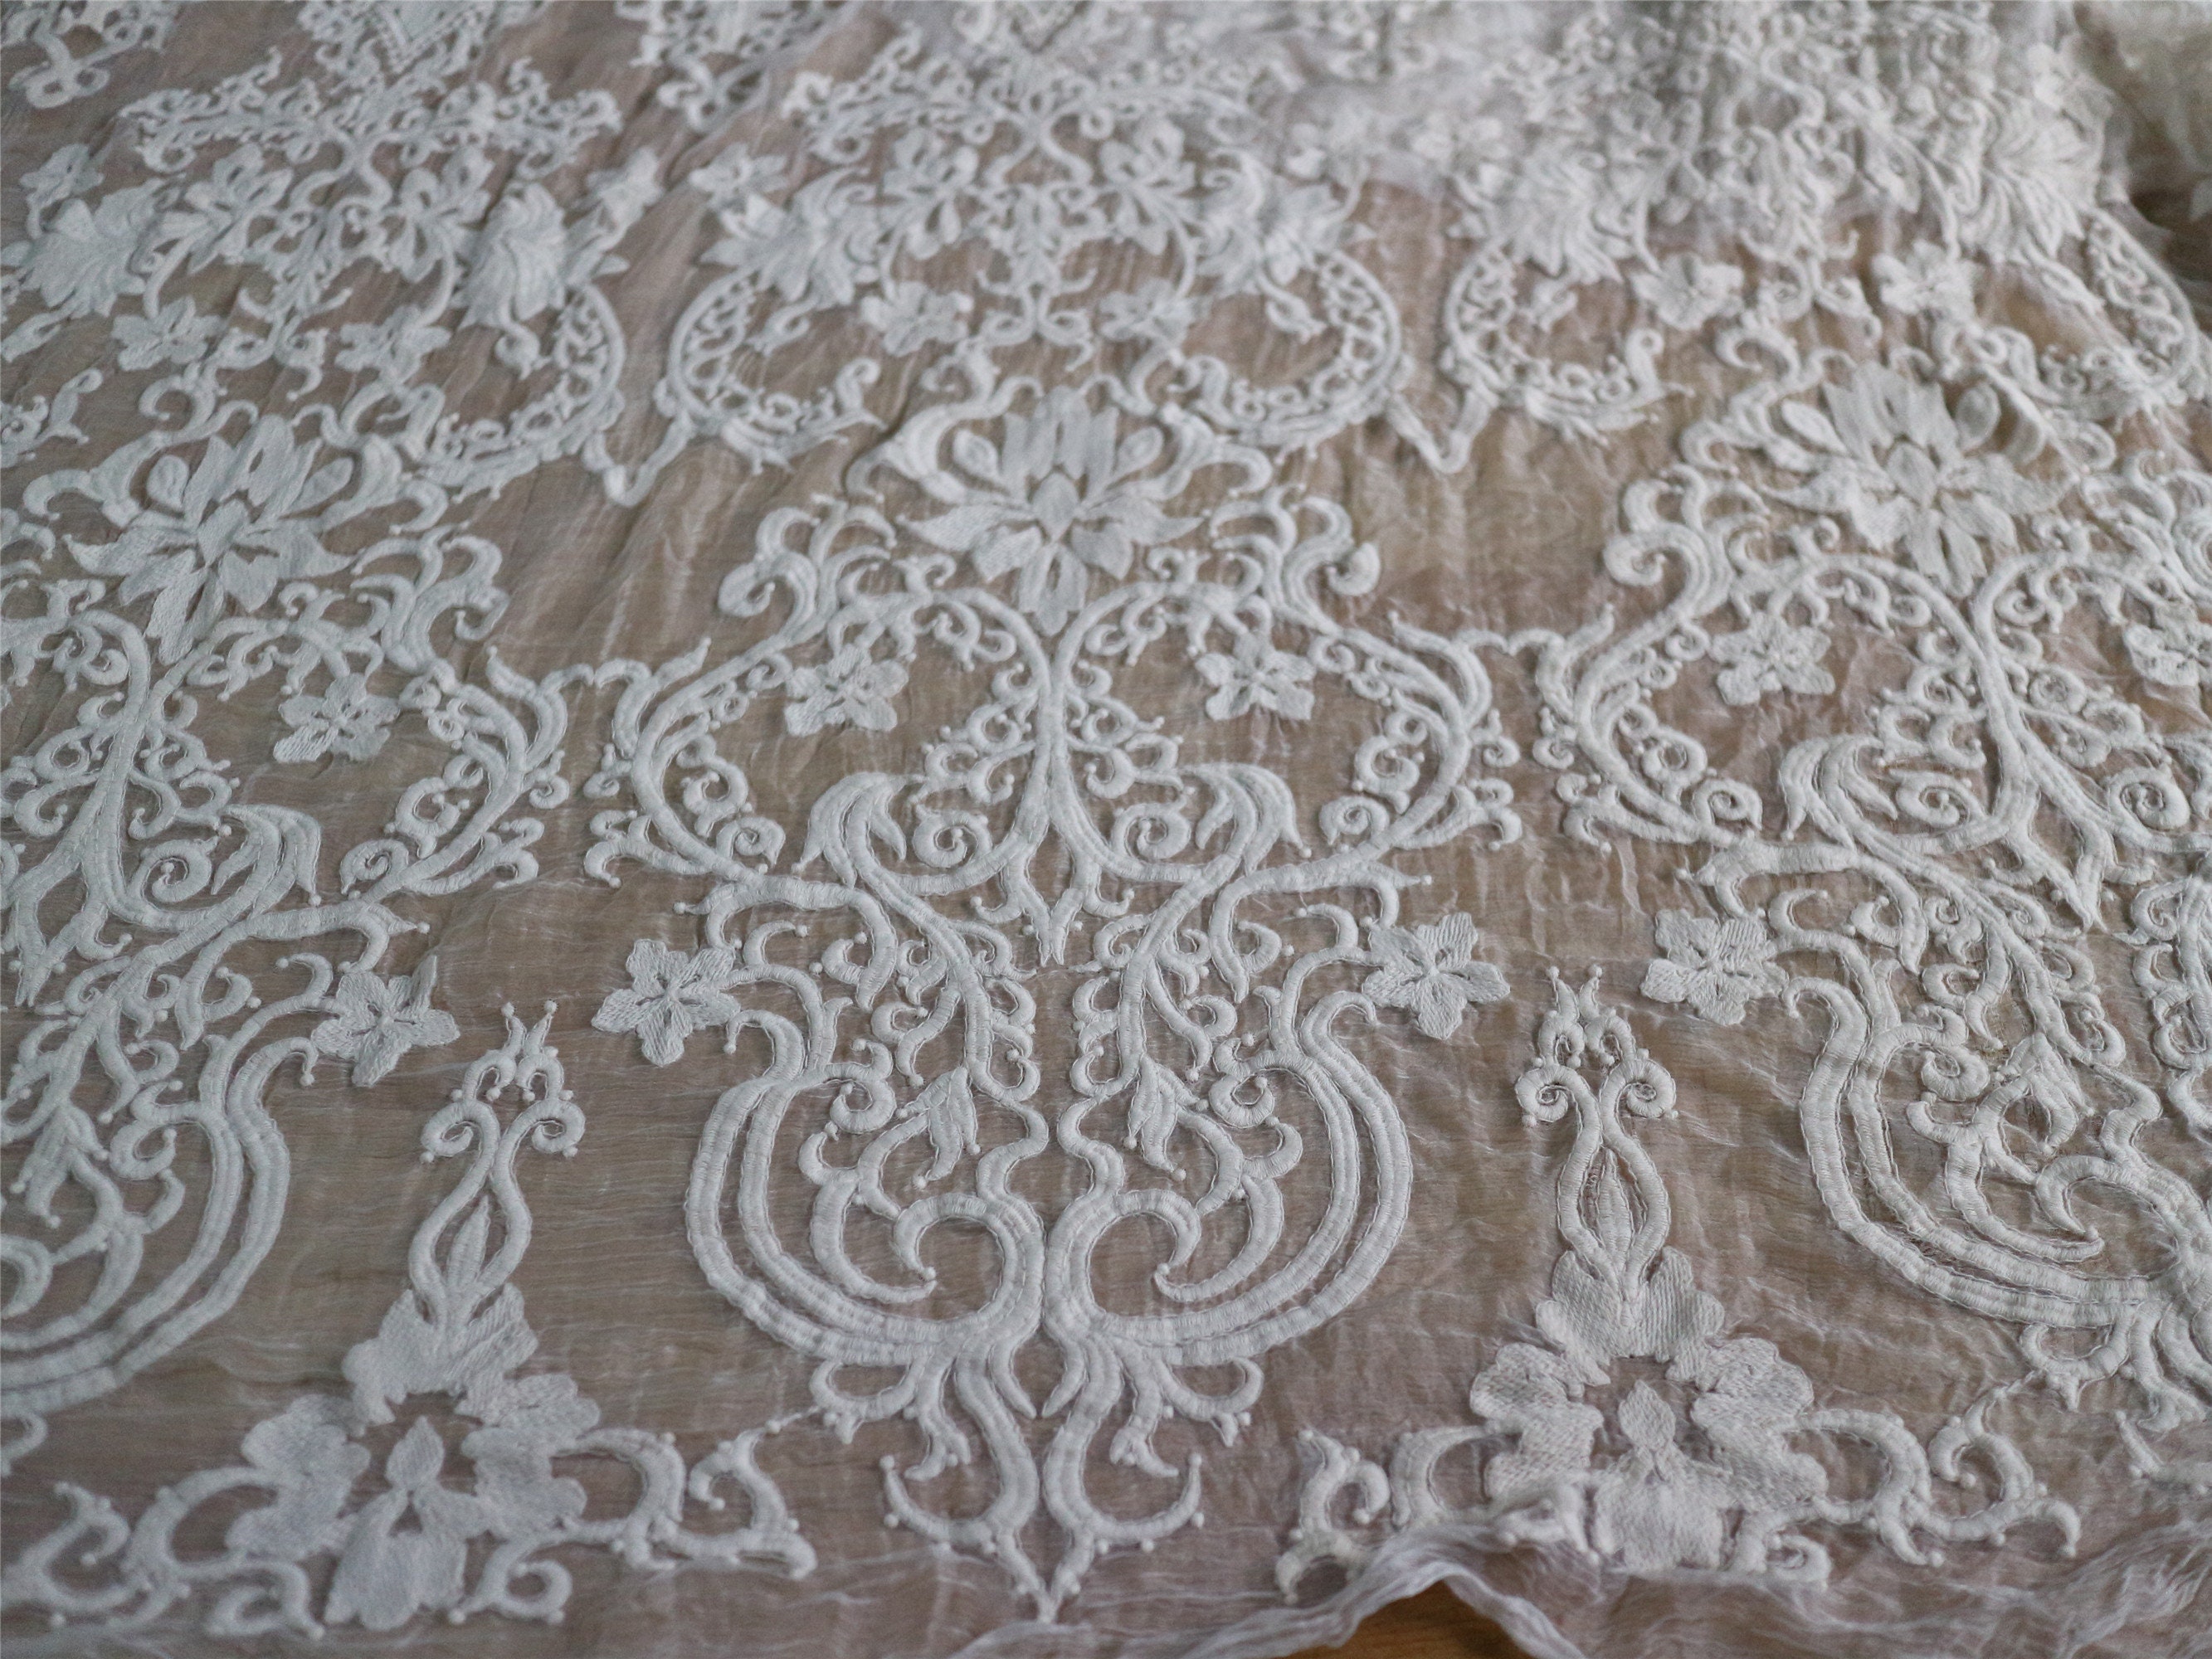 Ivory Embroidery Lace on Silk Fabric,crinkle Silk Chiffon Lace Fabric in  Beige White,wedding Dress Fabric 